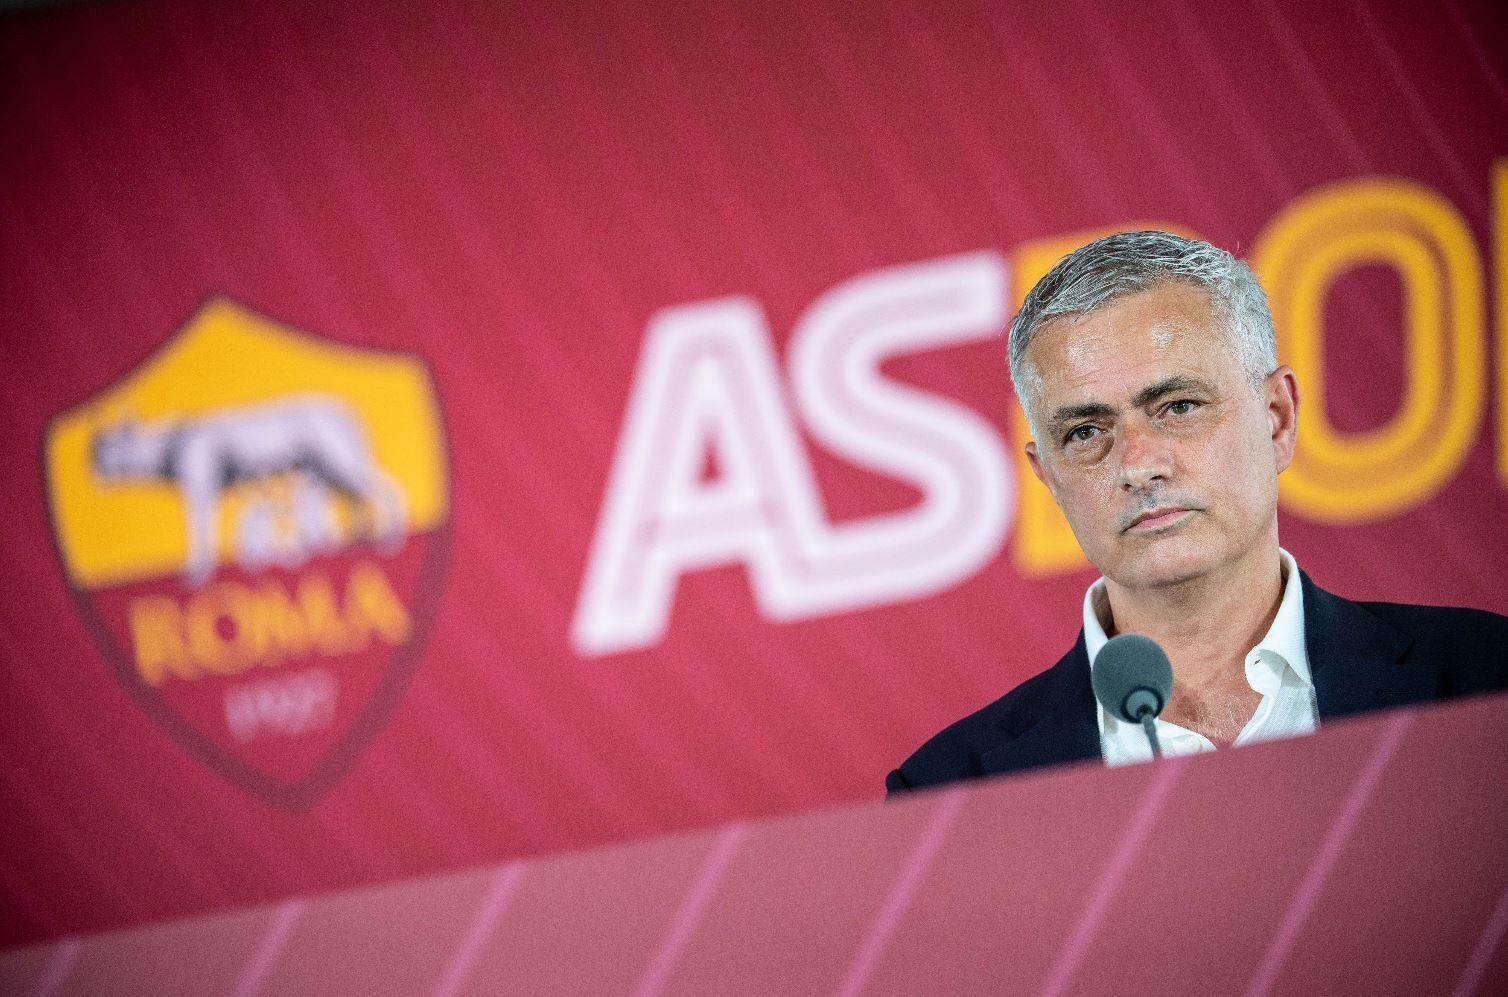 José Mourinho in conferenza @AS Roma via Getty Images 